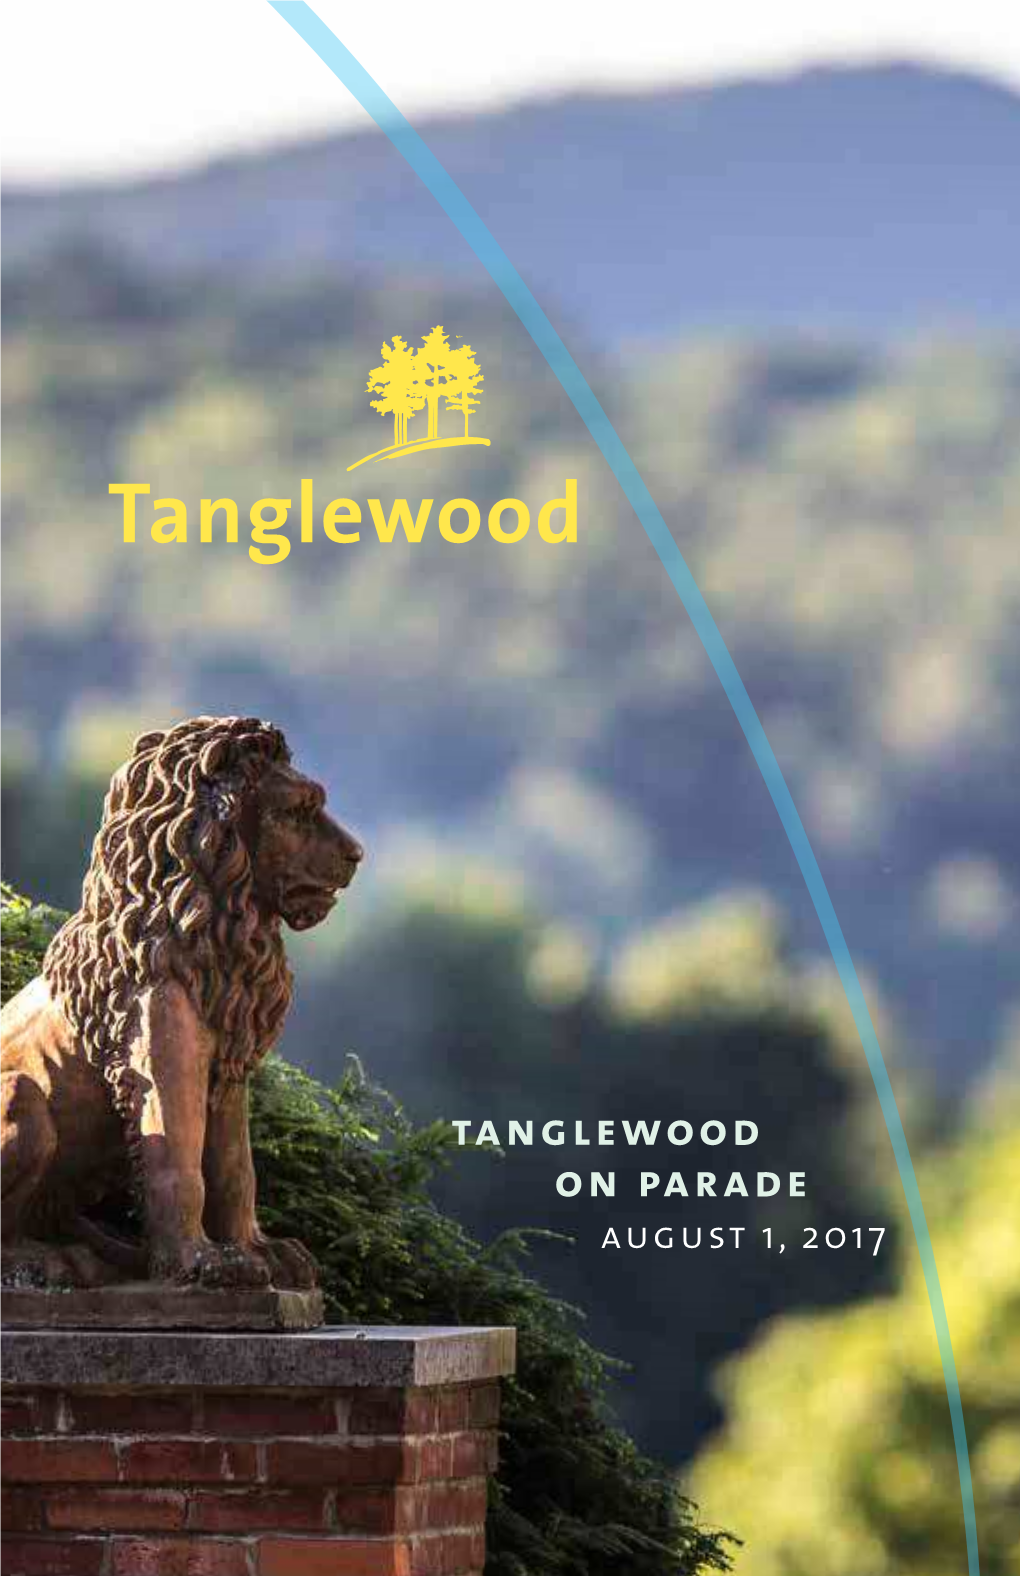 Tanglewood on Parade August 1, 2017 Tanglewood on Parade Tuesday, August 1, 2017